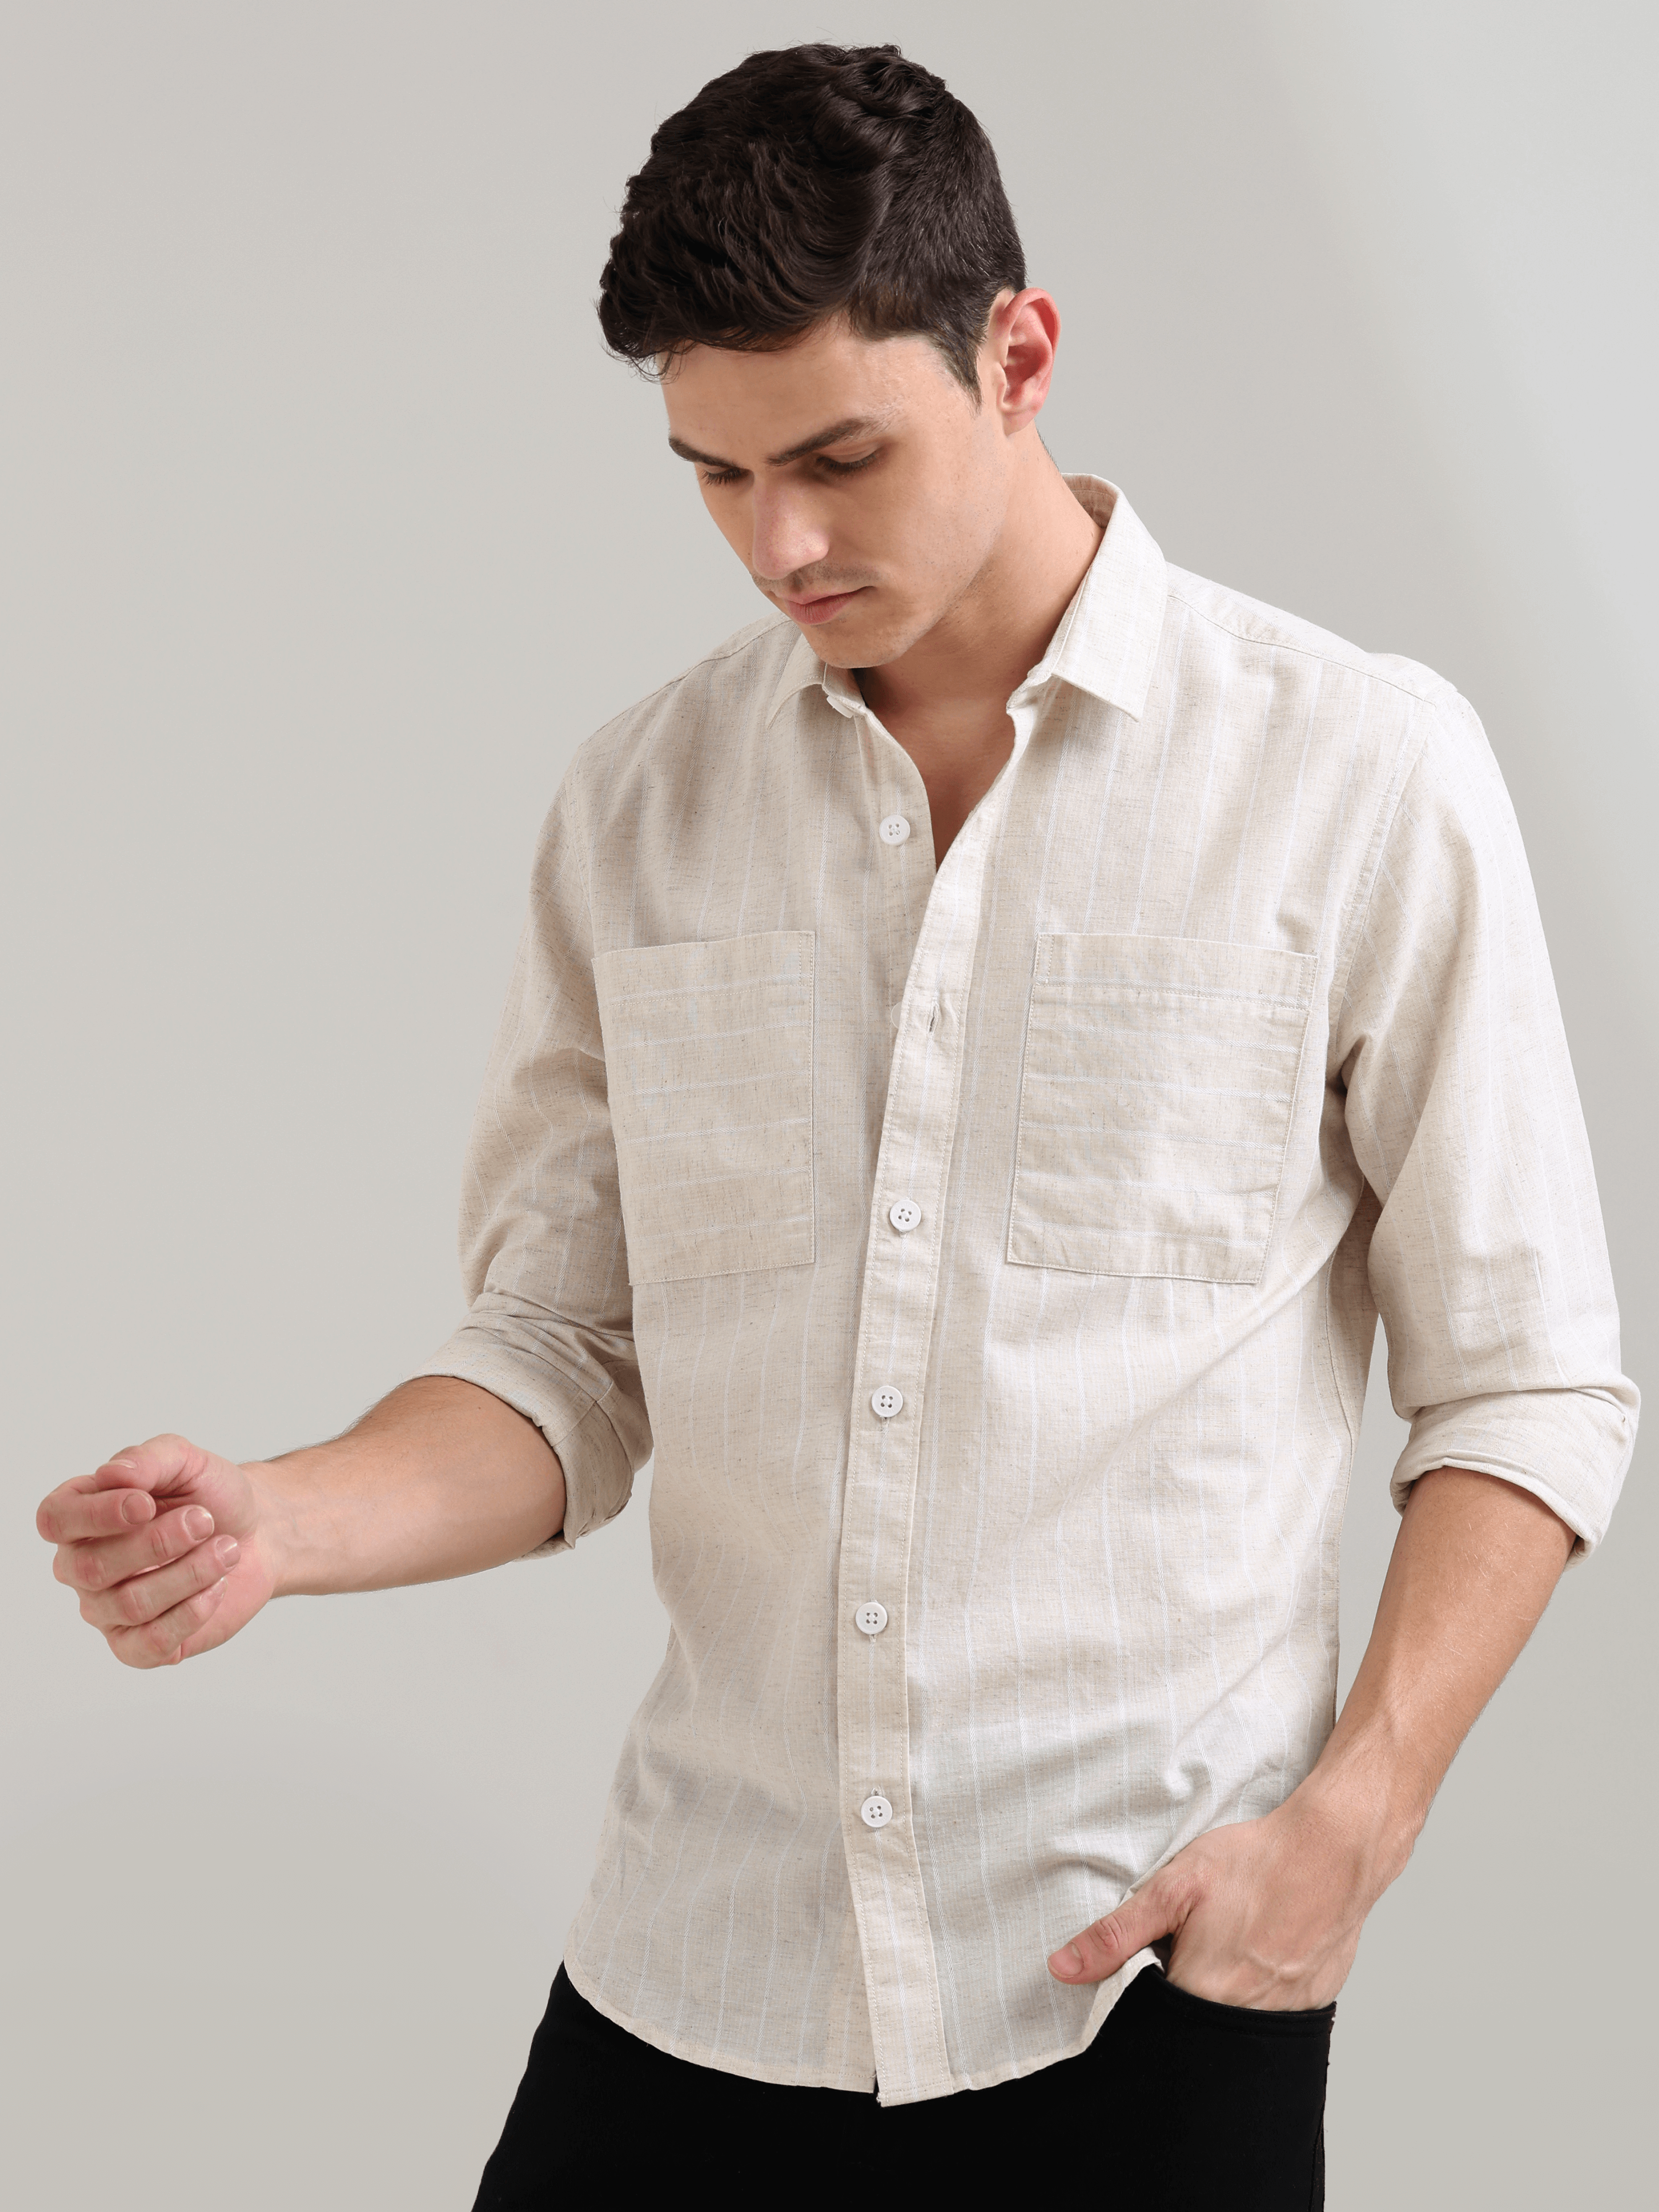 Pure Cotton white Stripes Casual Shirt shop online at Estilocus. 100% cotton; full-sleeve check shirt; Cut and sew placket; Regular collar; Double button edge cuff; Double pocket; curved bottom hemline; all double needle construction, finest quality sewin